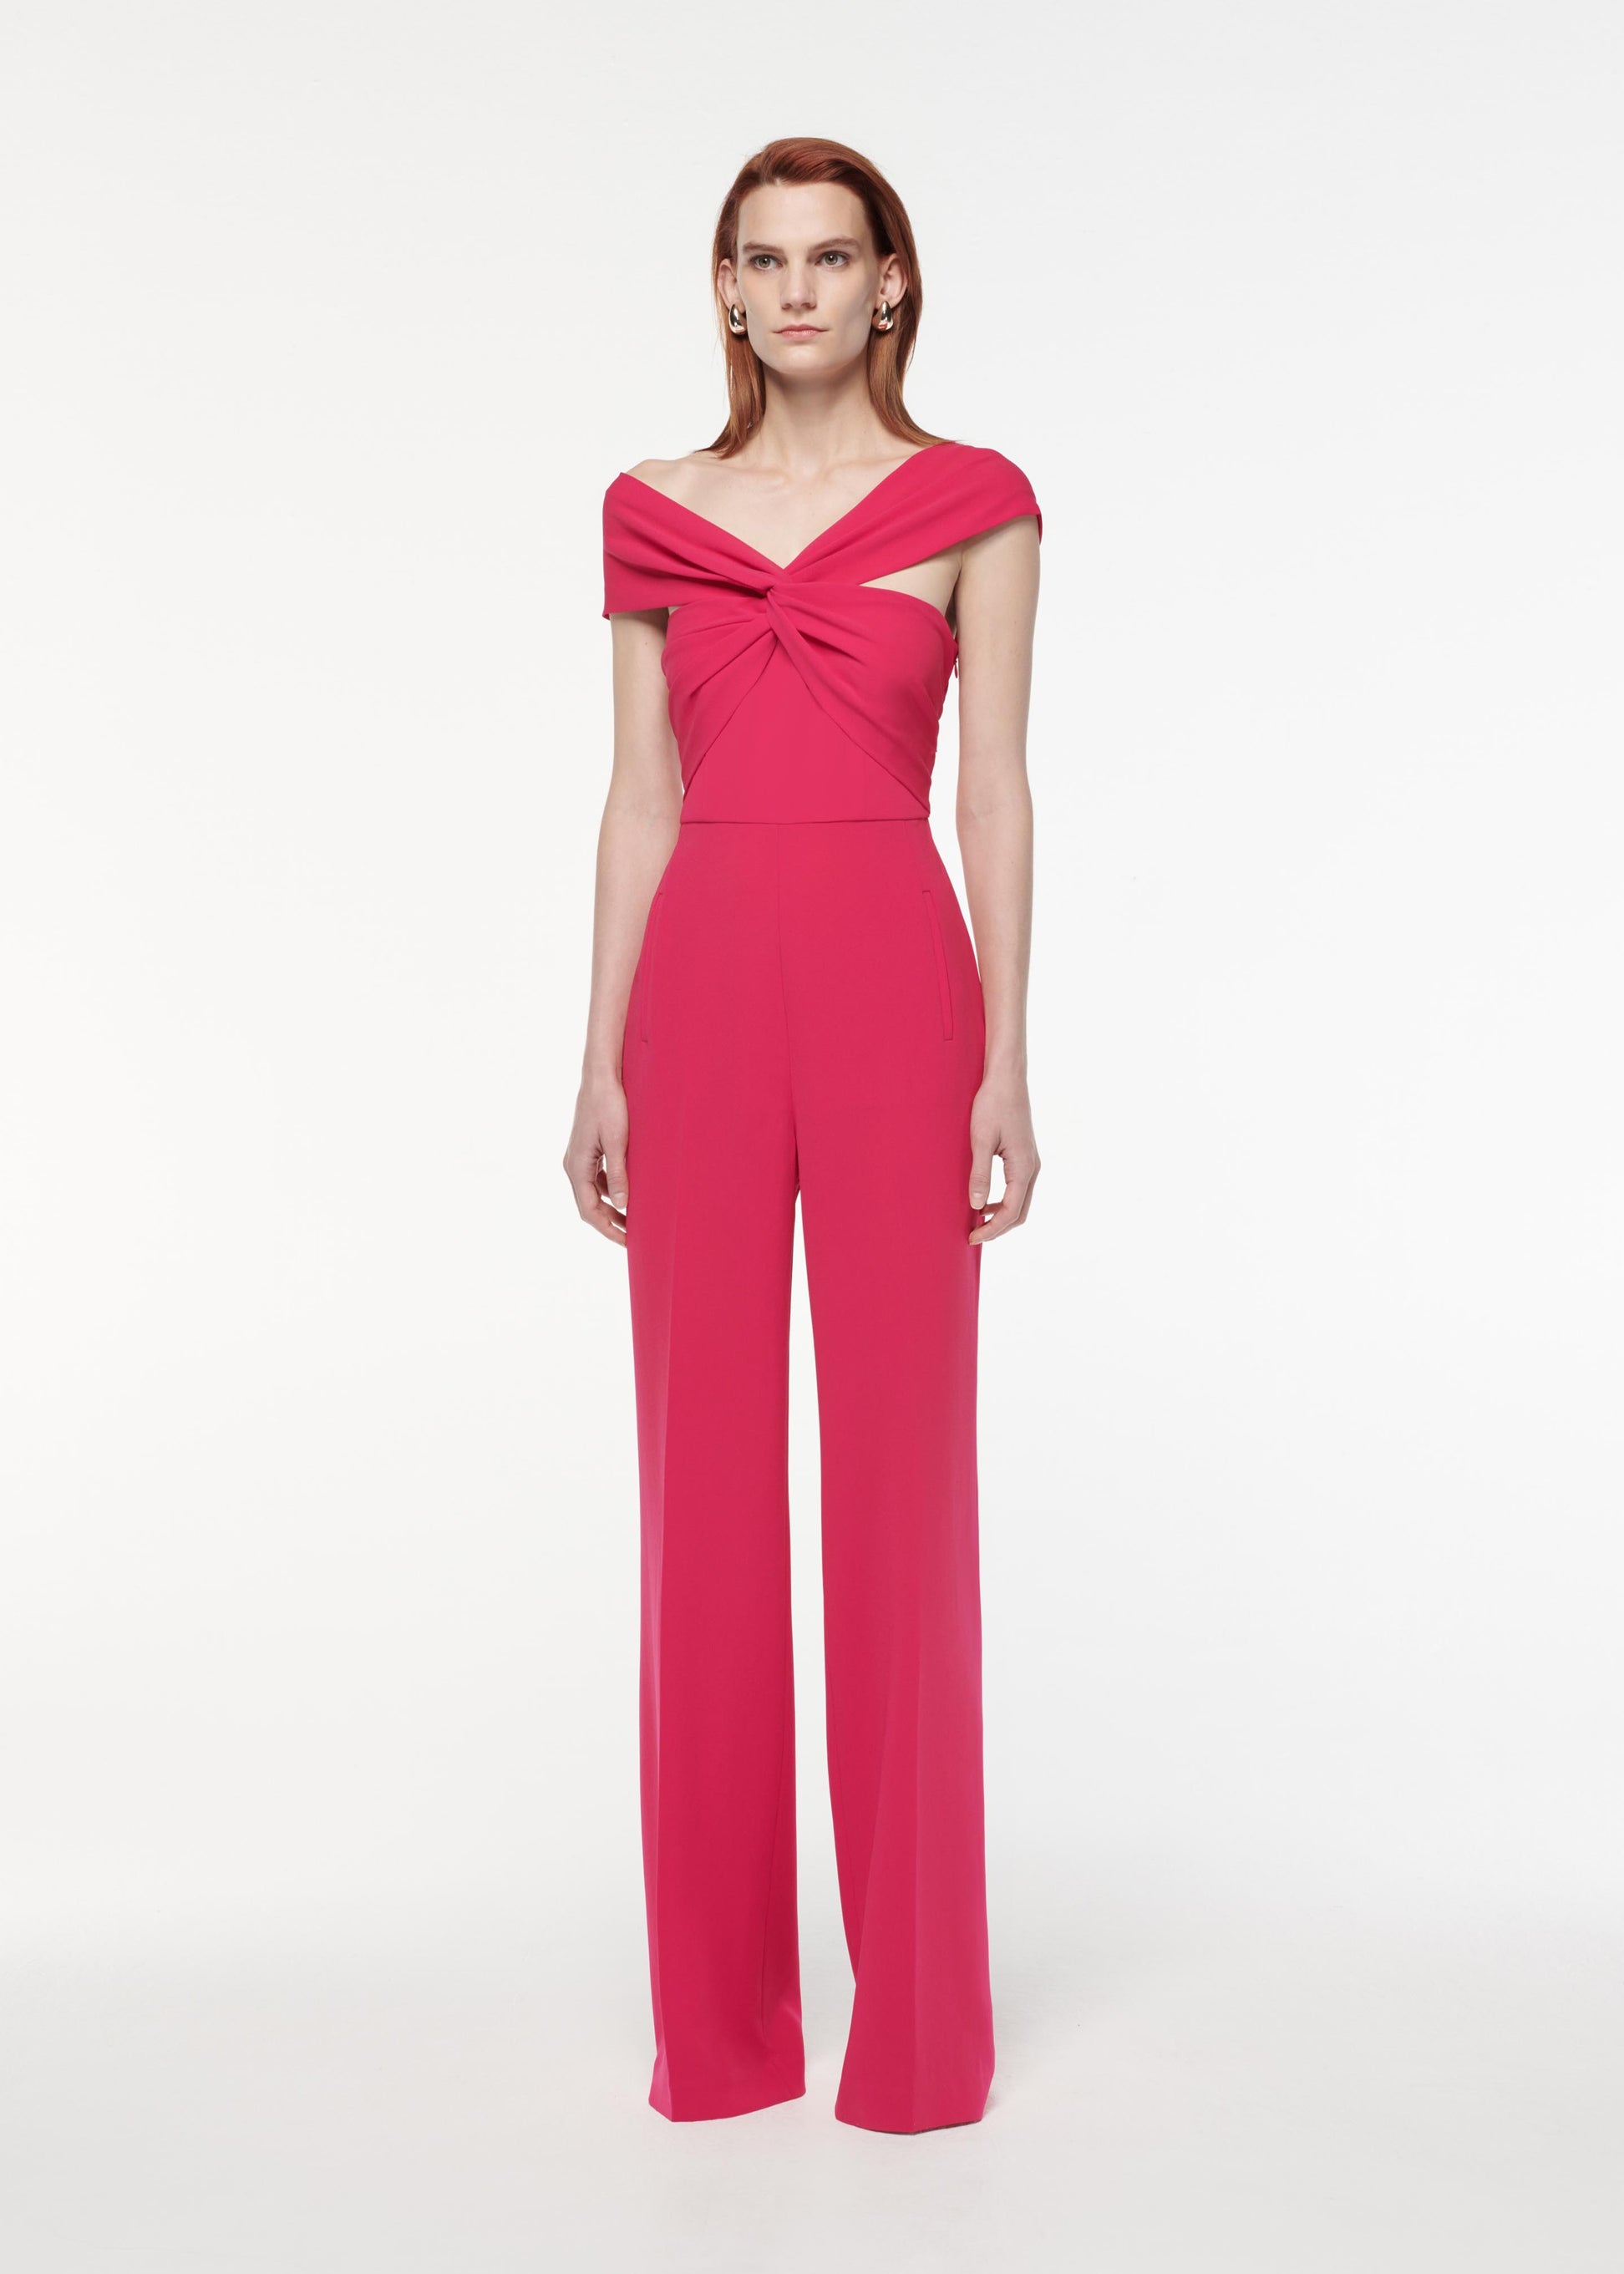 A photograph of a woman wearing a Asymmetric Light Cady Jumpsuit in Pink